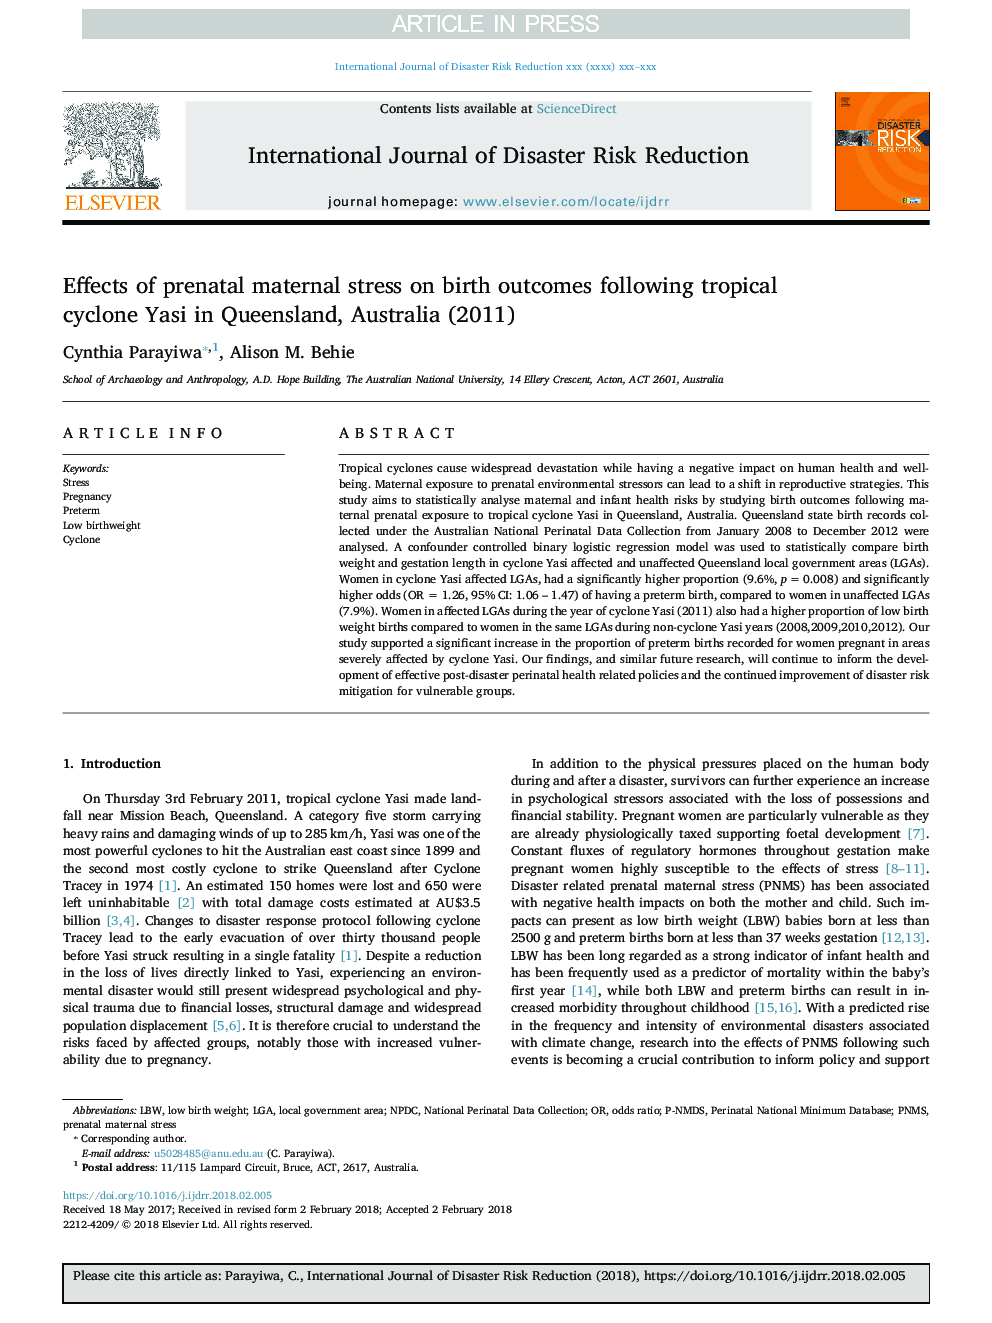 Effects of prenatal maternal stress on birth outcomes following tropical cyclone Yasi in Queensland, Australia (2011)